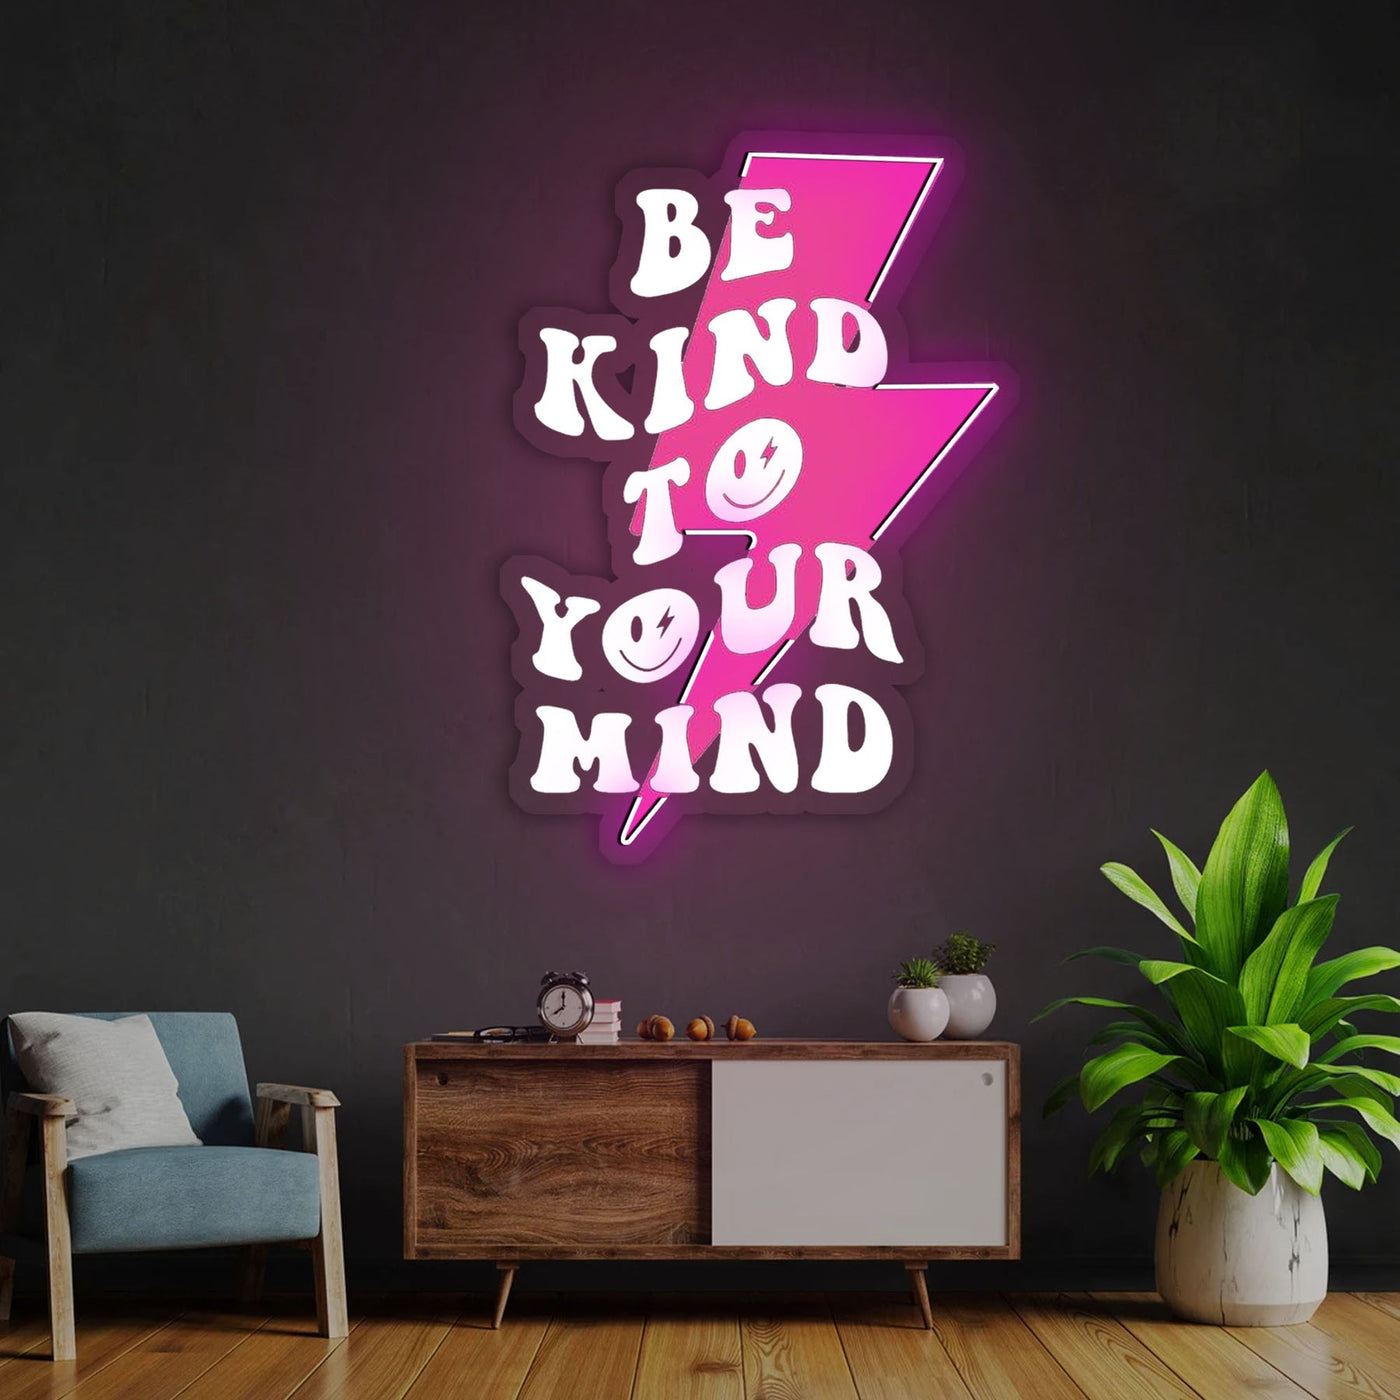 Be Kind to Your Mind Neon Sign x Acrylic Artwork - 20 inchesLED Neon x Acrylic Print